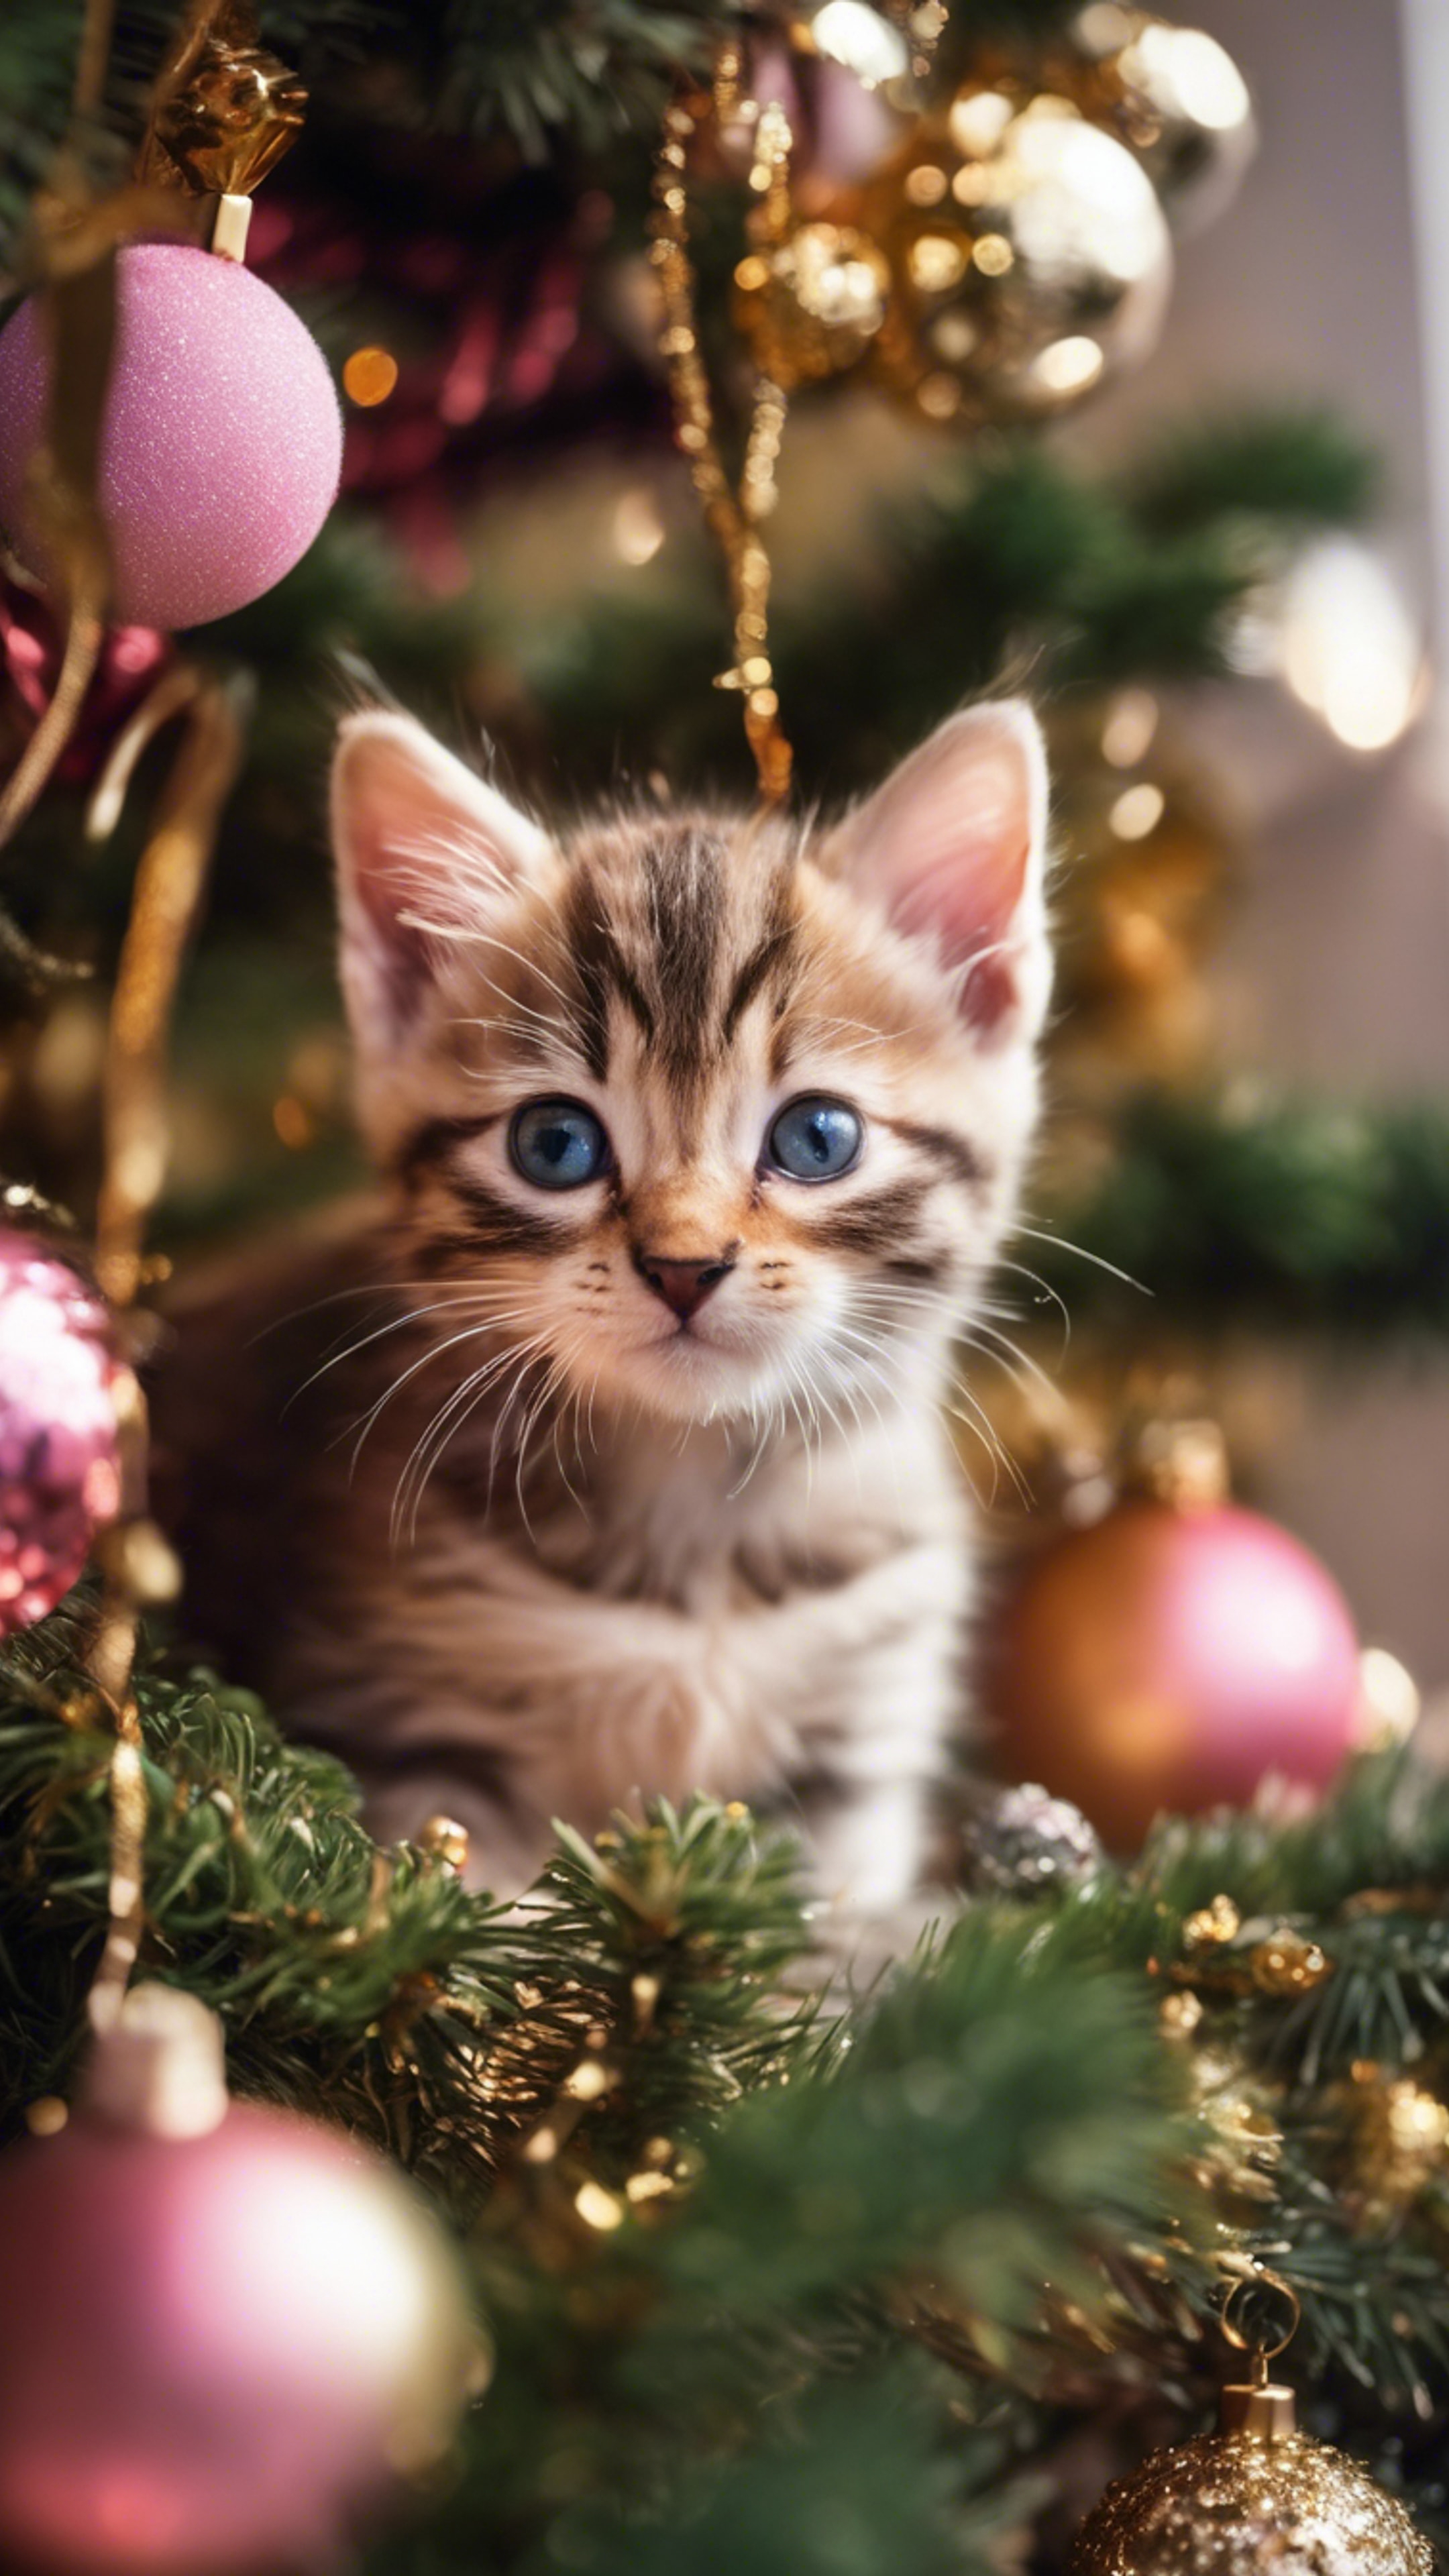 A curious kitten with pink fur investigating shiny gold ornaments on a Christmas tree.壁紙[73a86c1a032148fe866e]